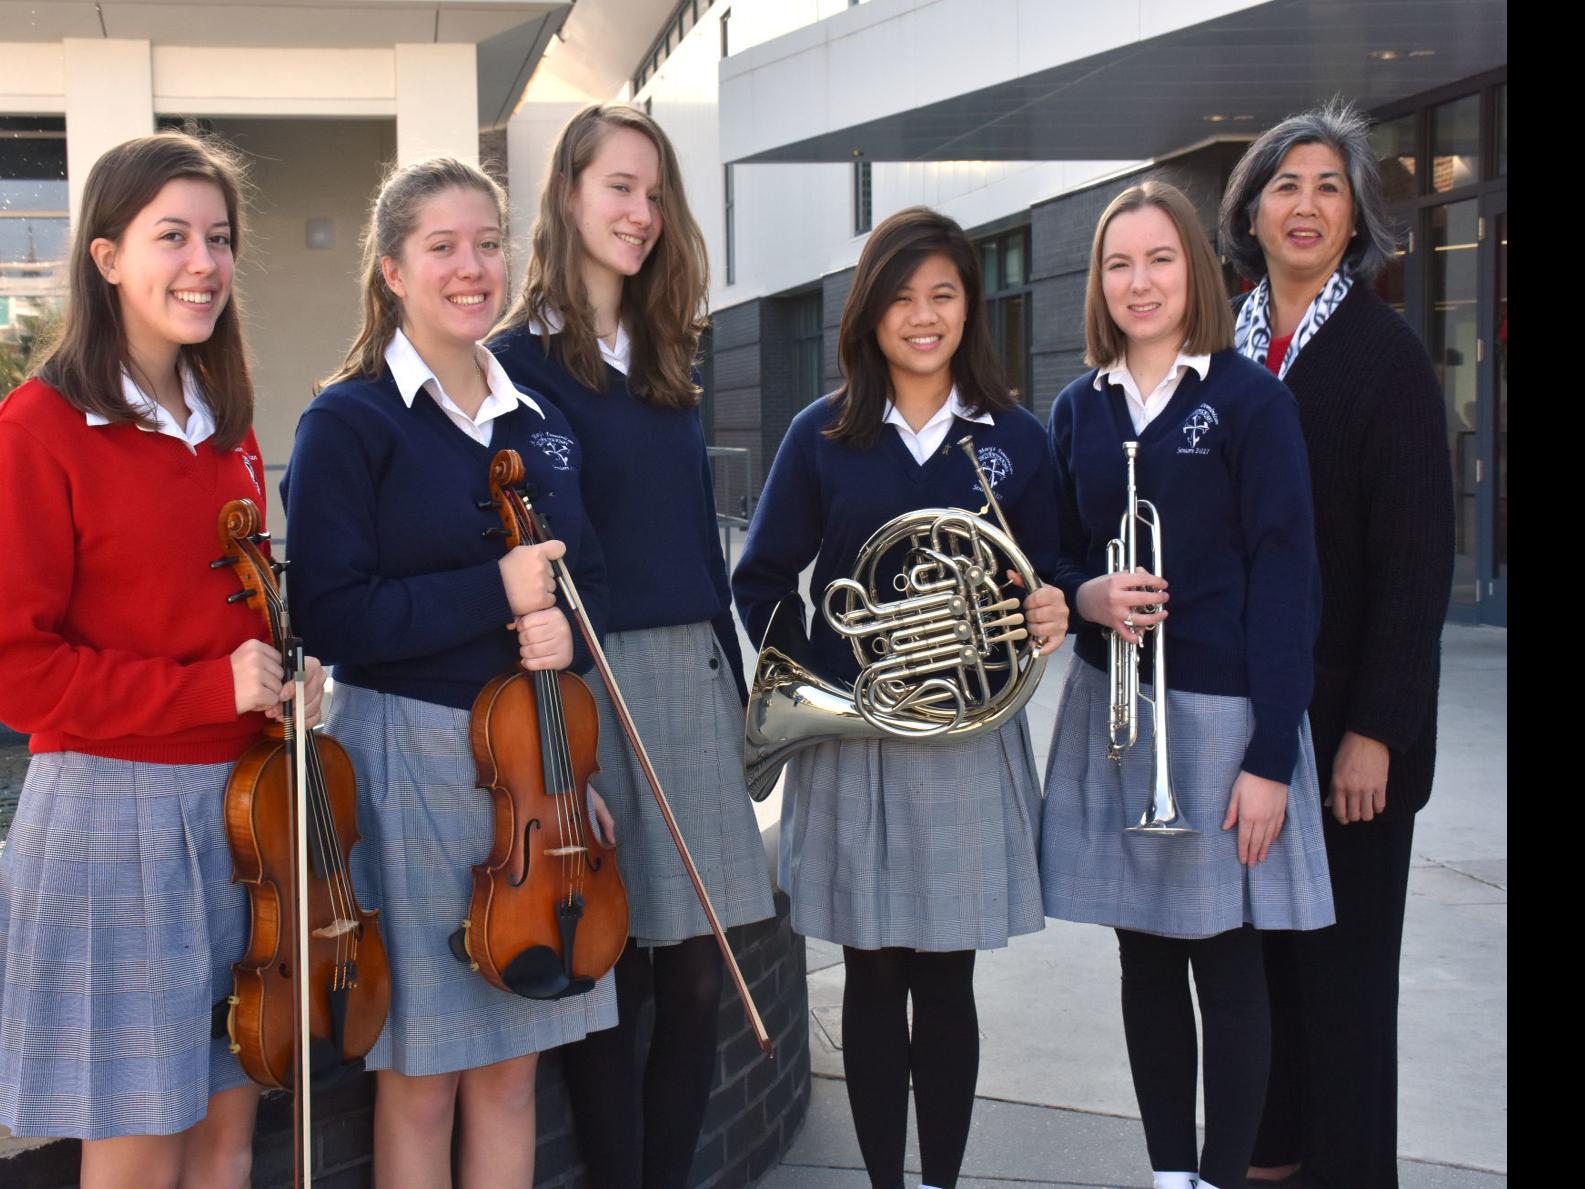 St. Mary's Dominican High School music students earn honors | Crescent City  community news | nola.com